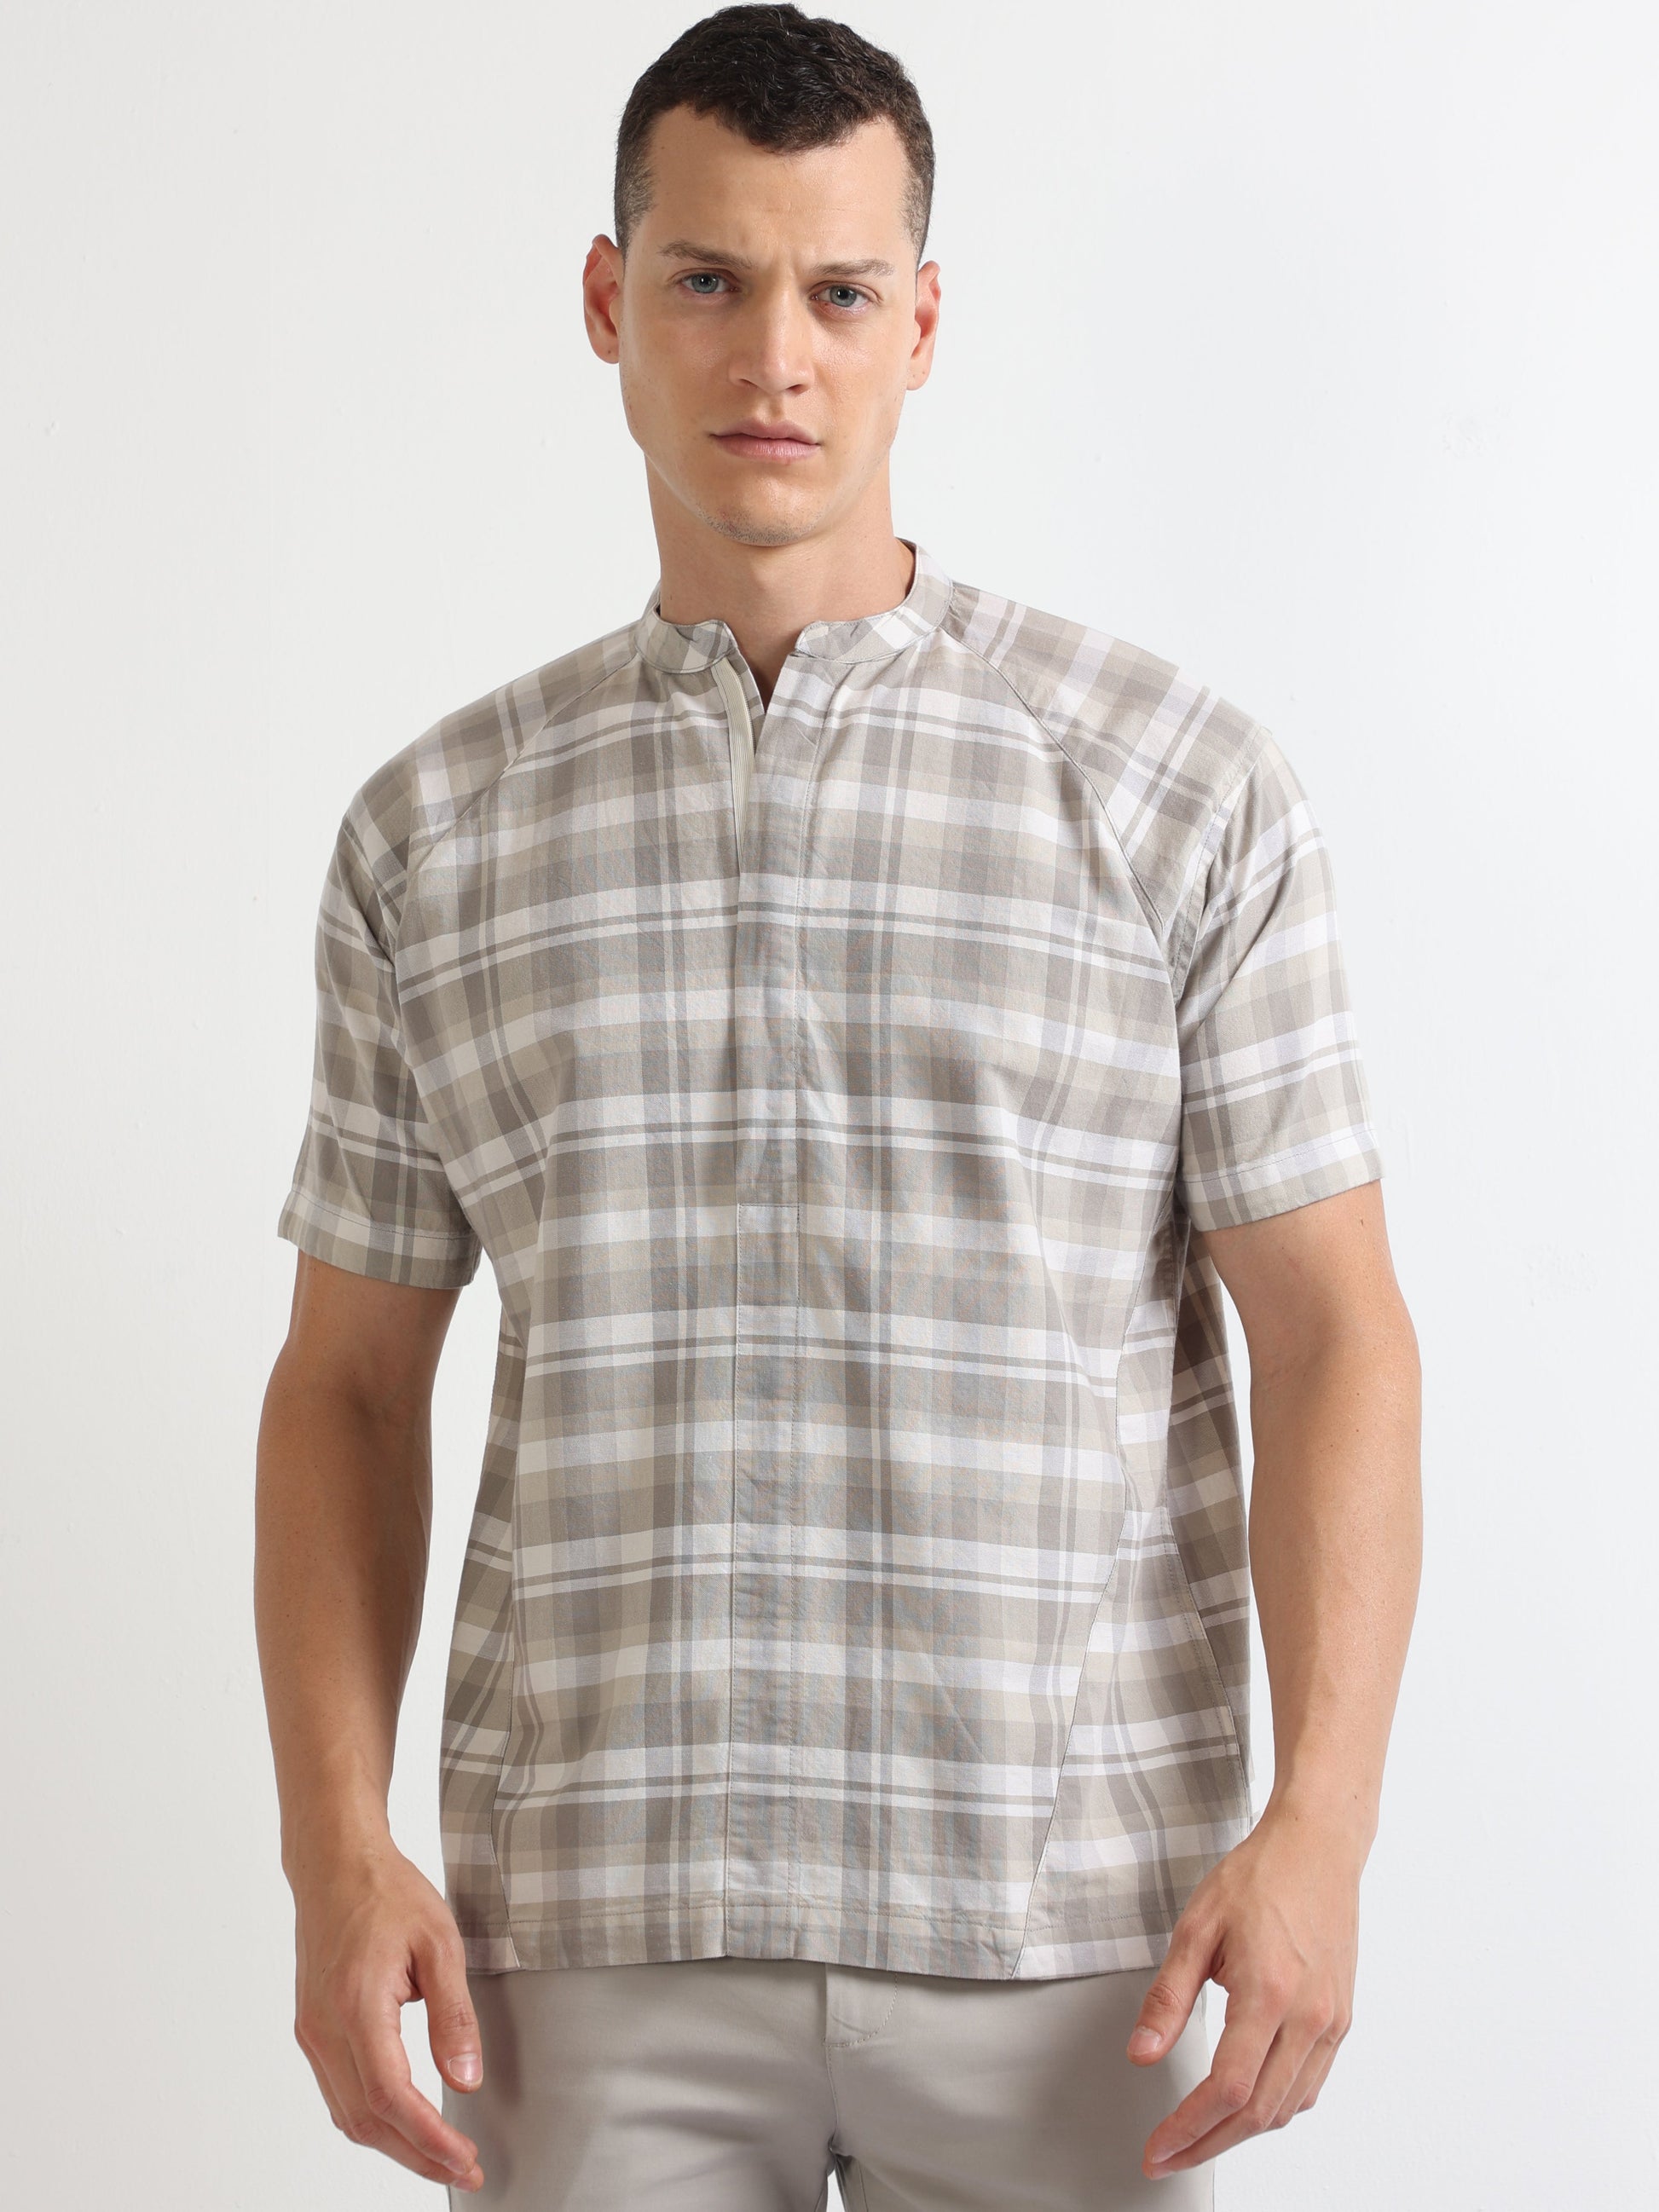 Buy Chinese Collar Natural Colour Checked Shirt Online.